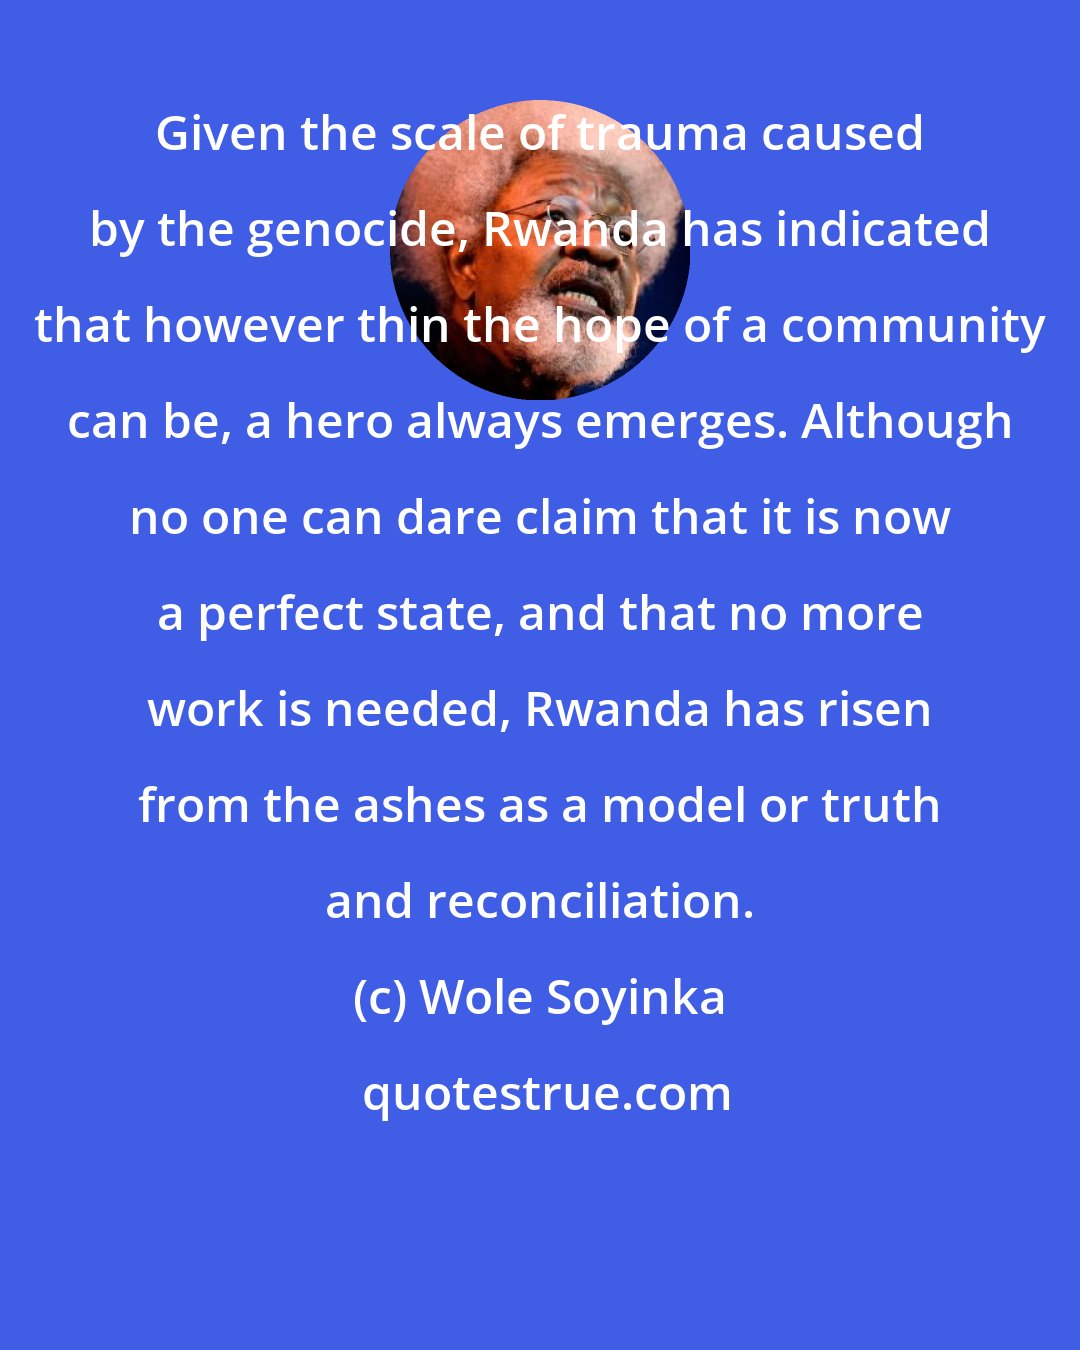 Wole Soyinka: Given the scale of trauma caused by the genocide, Rwanda has indicated that however thin the hope of a community can be, a hero always emerges. Although no one can dare claim that it is now a perfect state, and that no more work is needed, Rwanda has risen from the ashes as a model or truth and reconciliation.